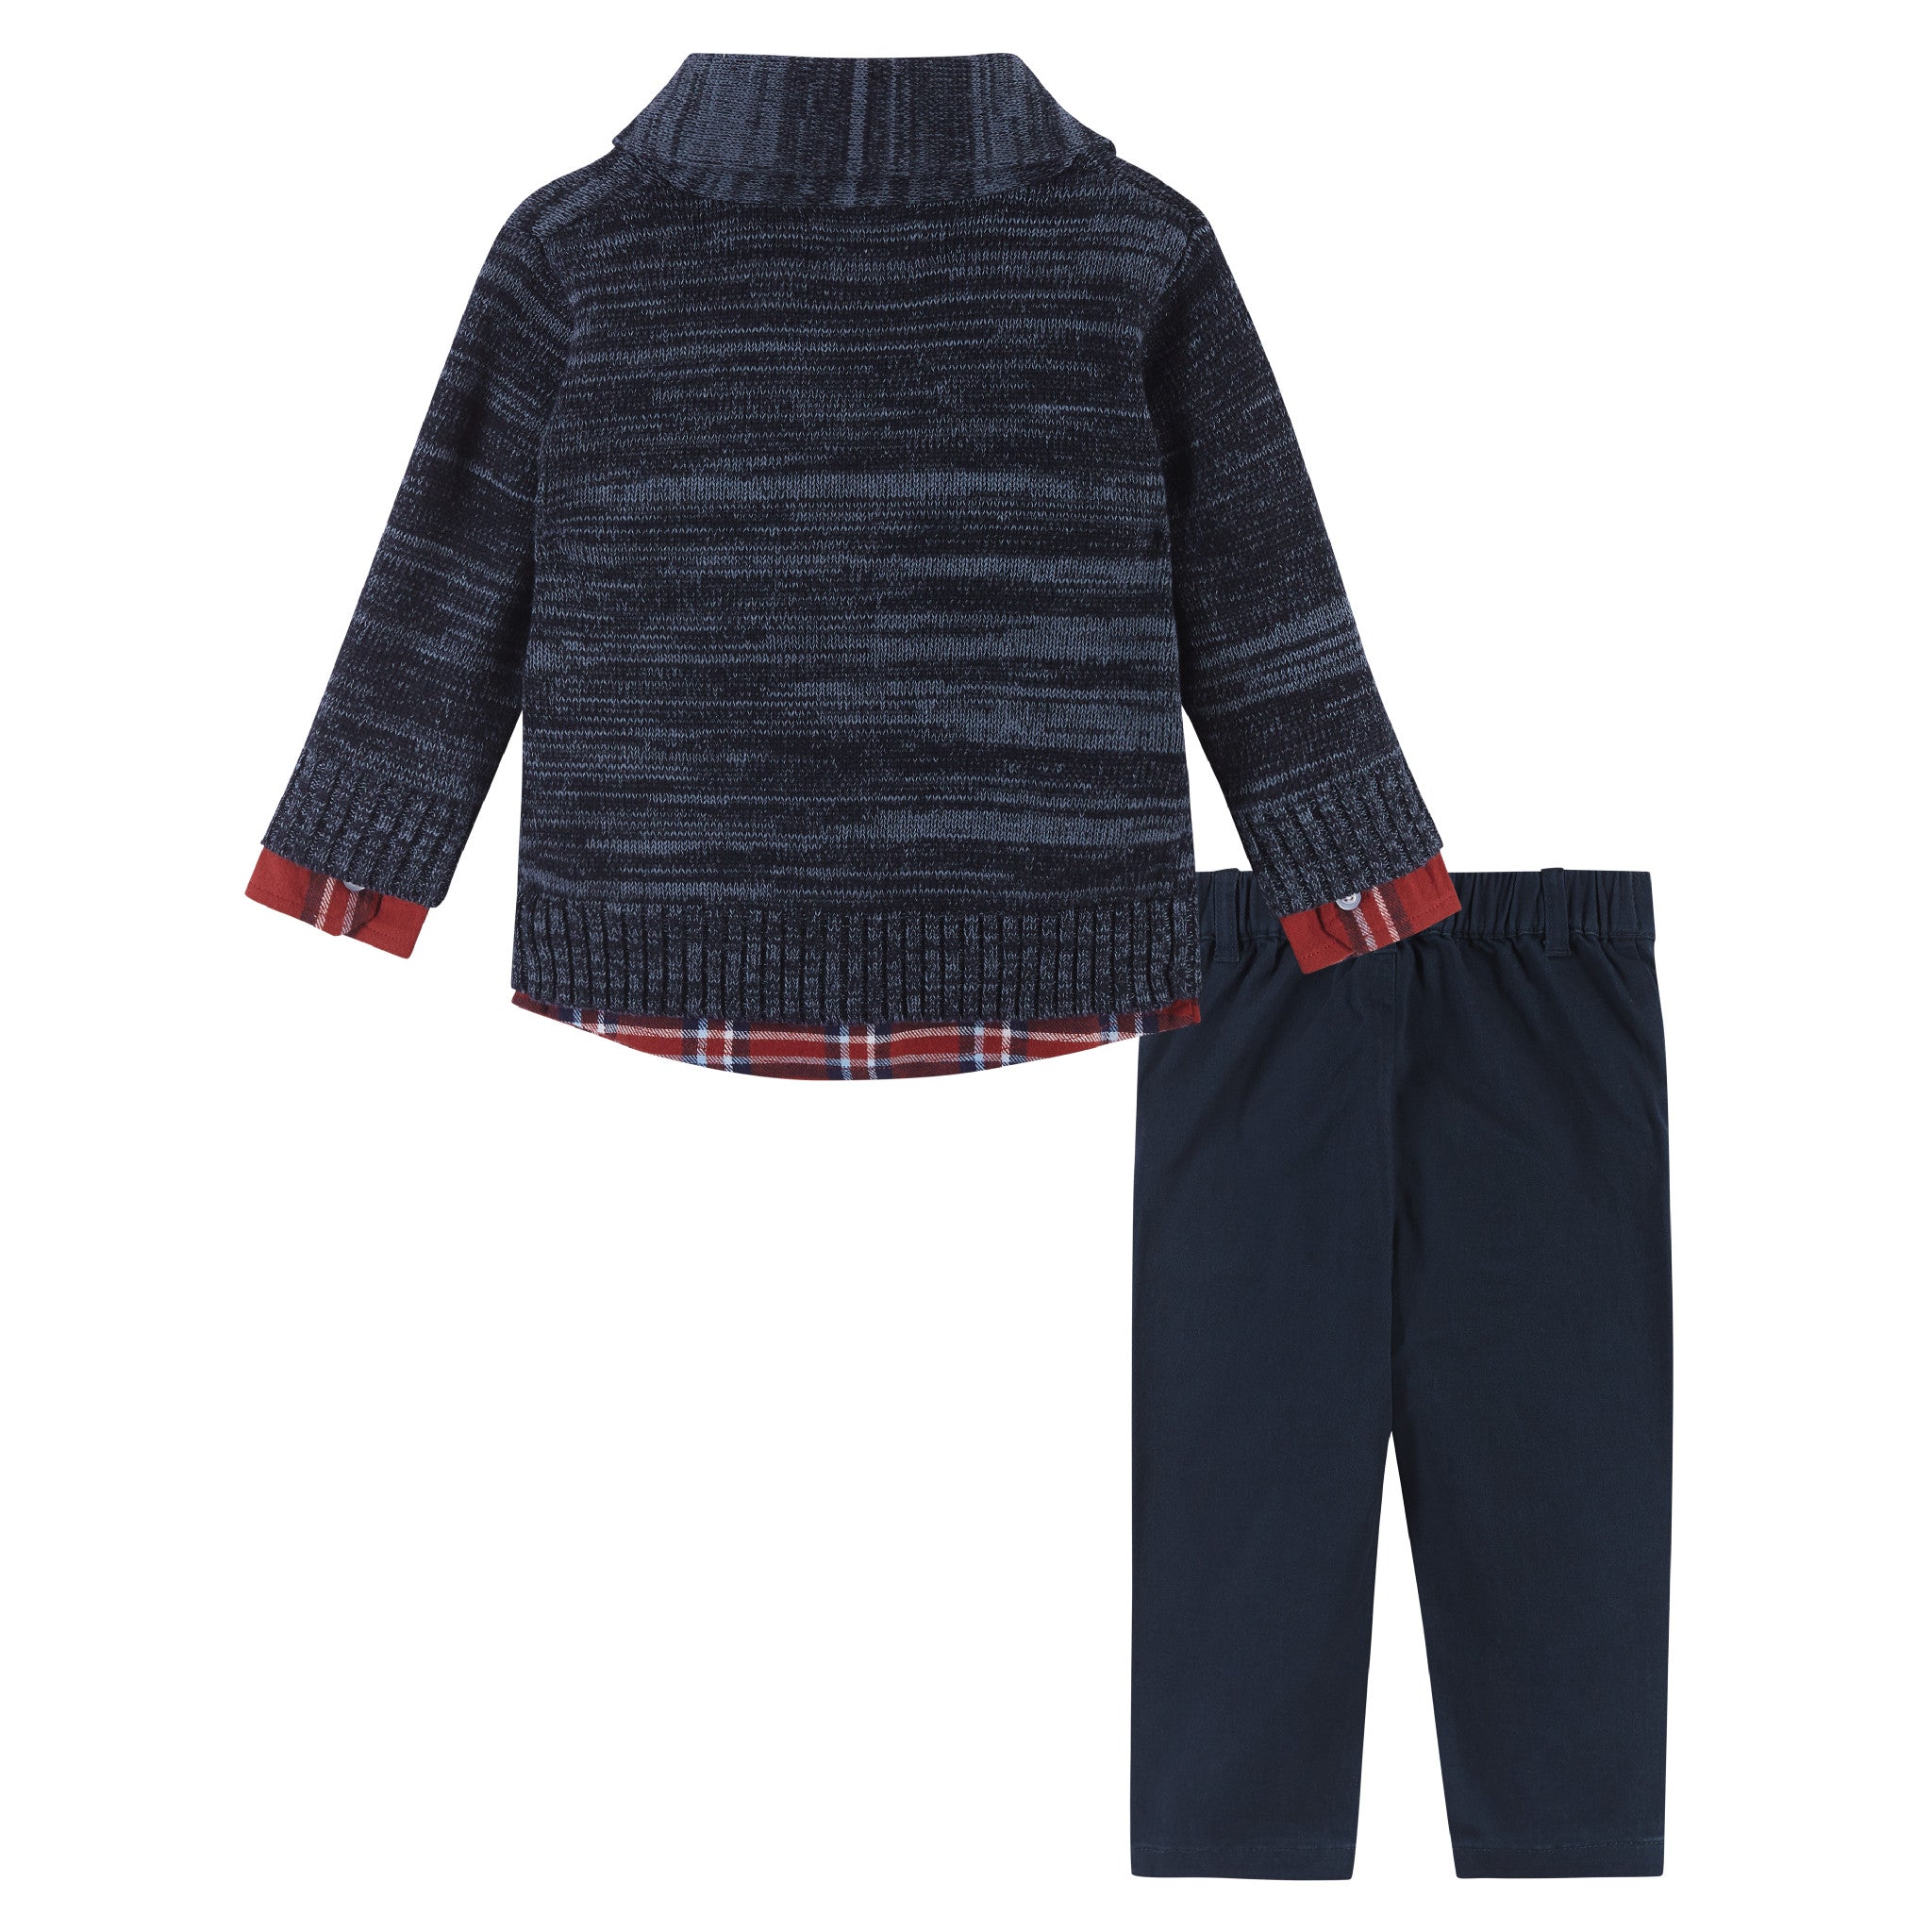 Andy & Evan boys 3-Piece Marbled Navy Toggle Cardigan Sweater Set - little birdies